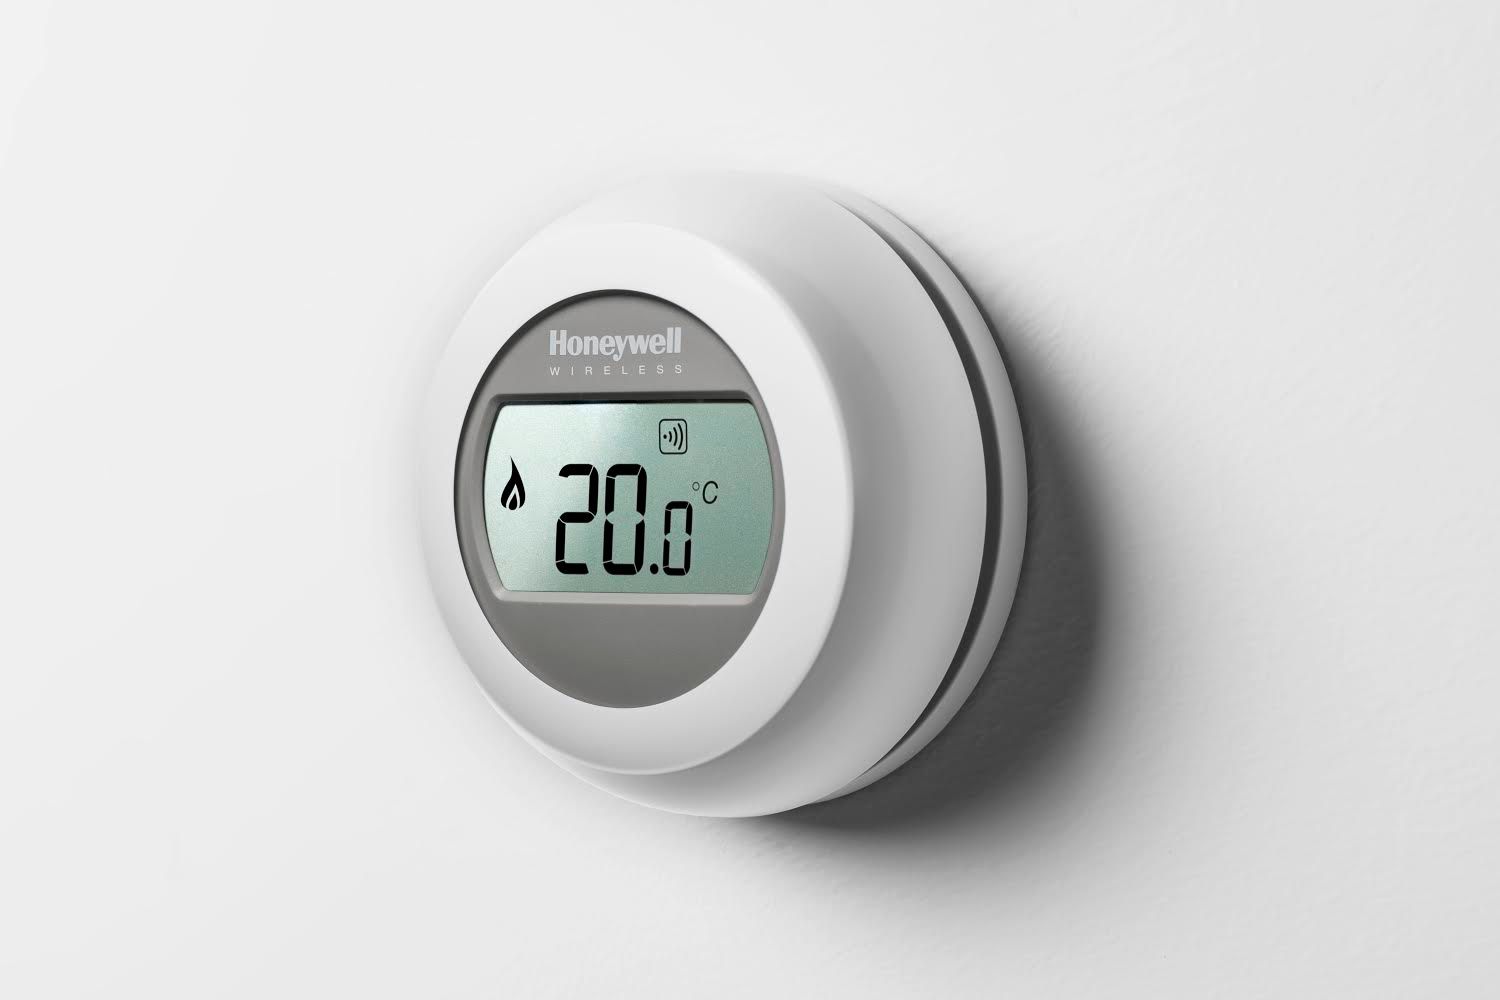 honeywell single zone thermostat connect your heating to the internet for 139 image 1